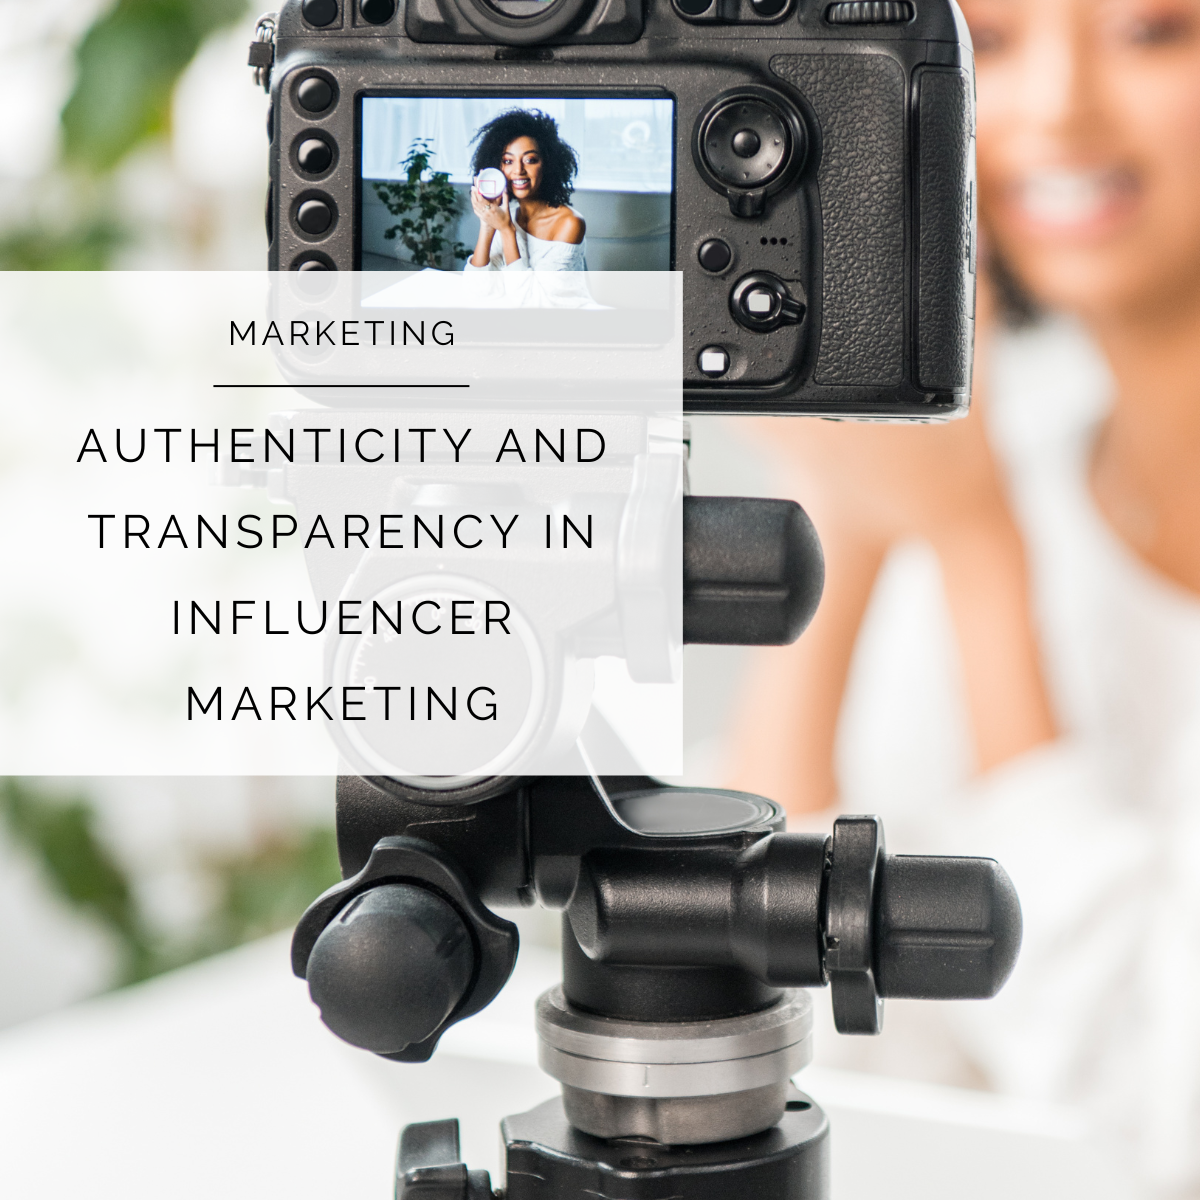 Authenticity and Transparency in Influencer Marketing